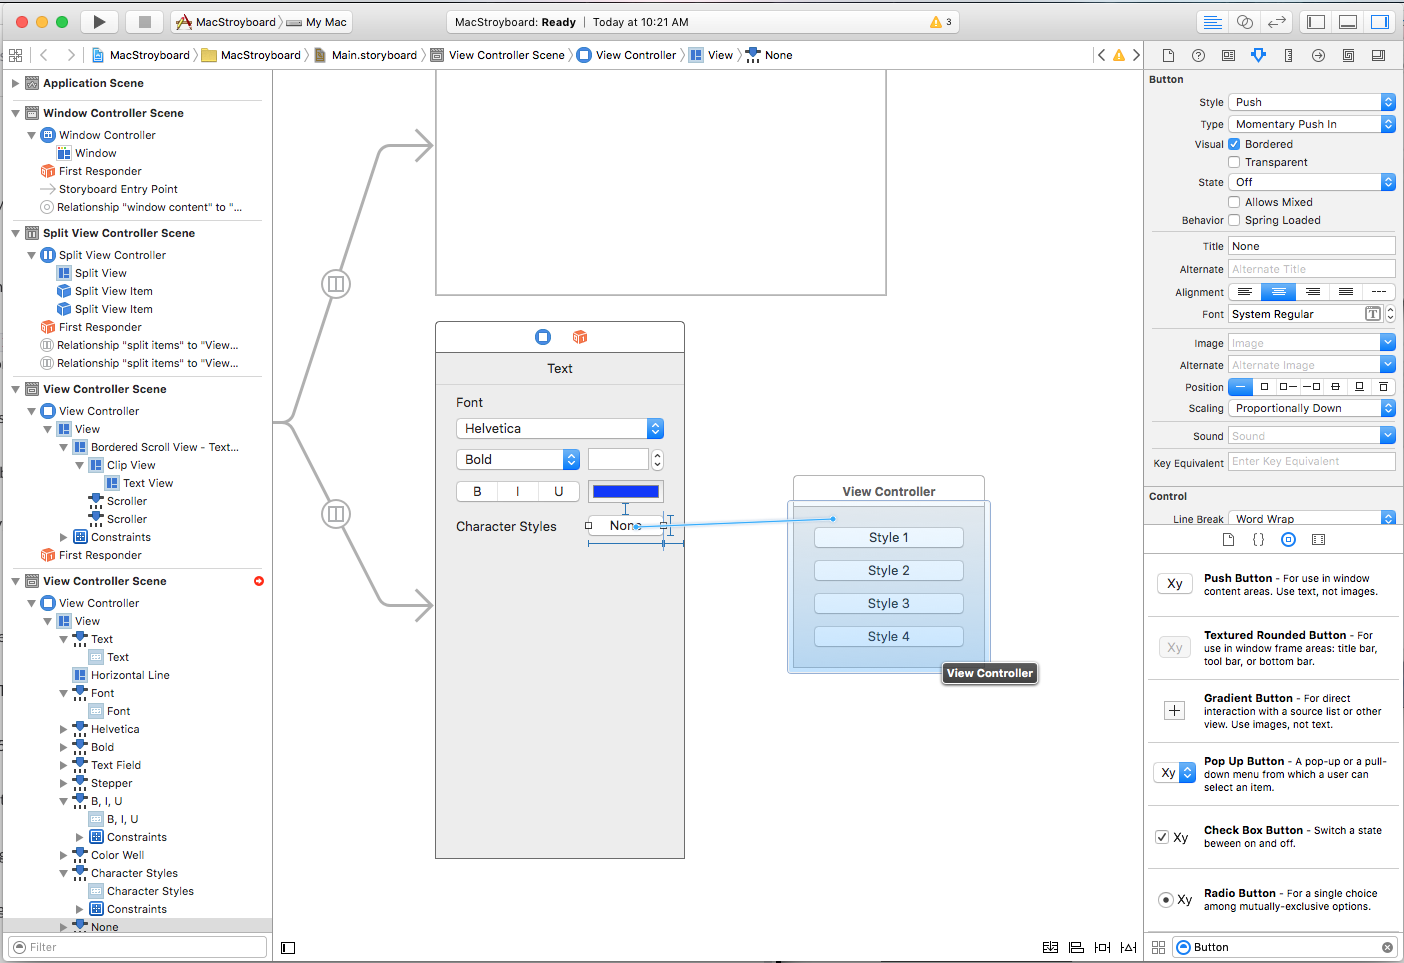 Dragging to create a new segue in View Controller.